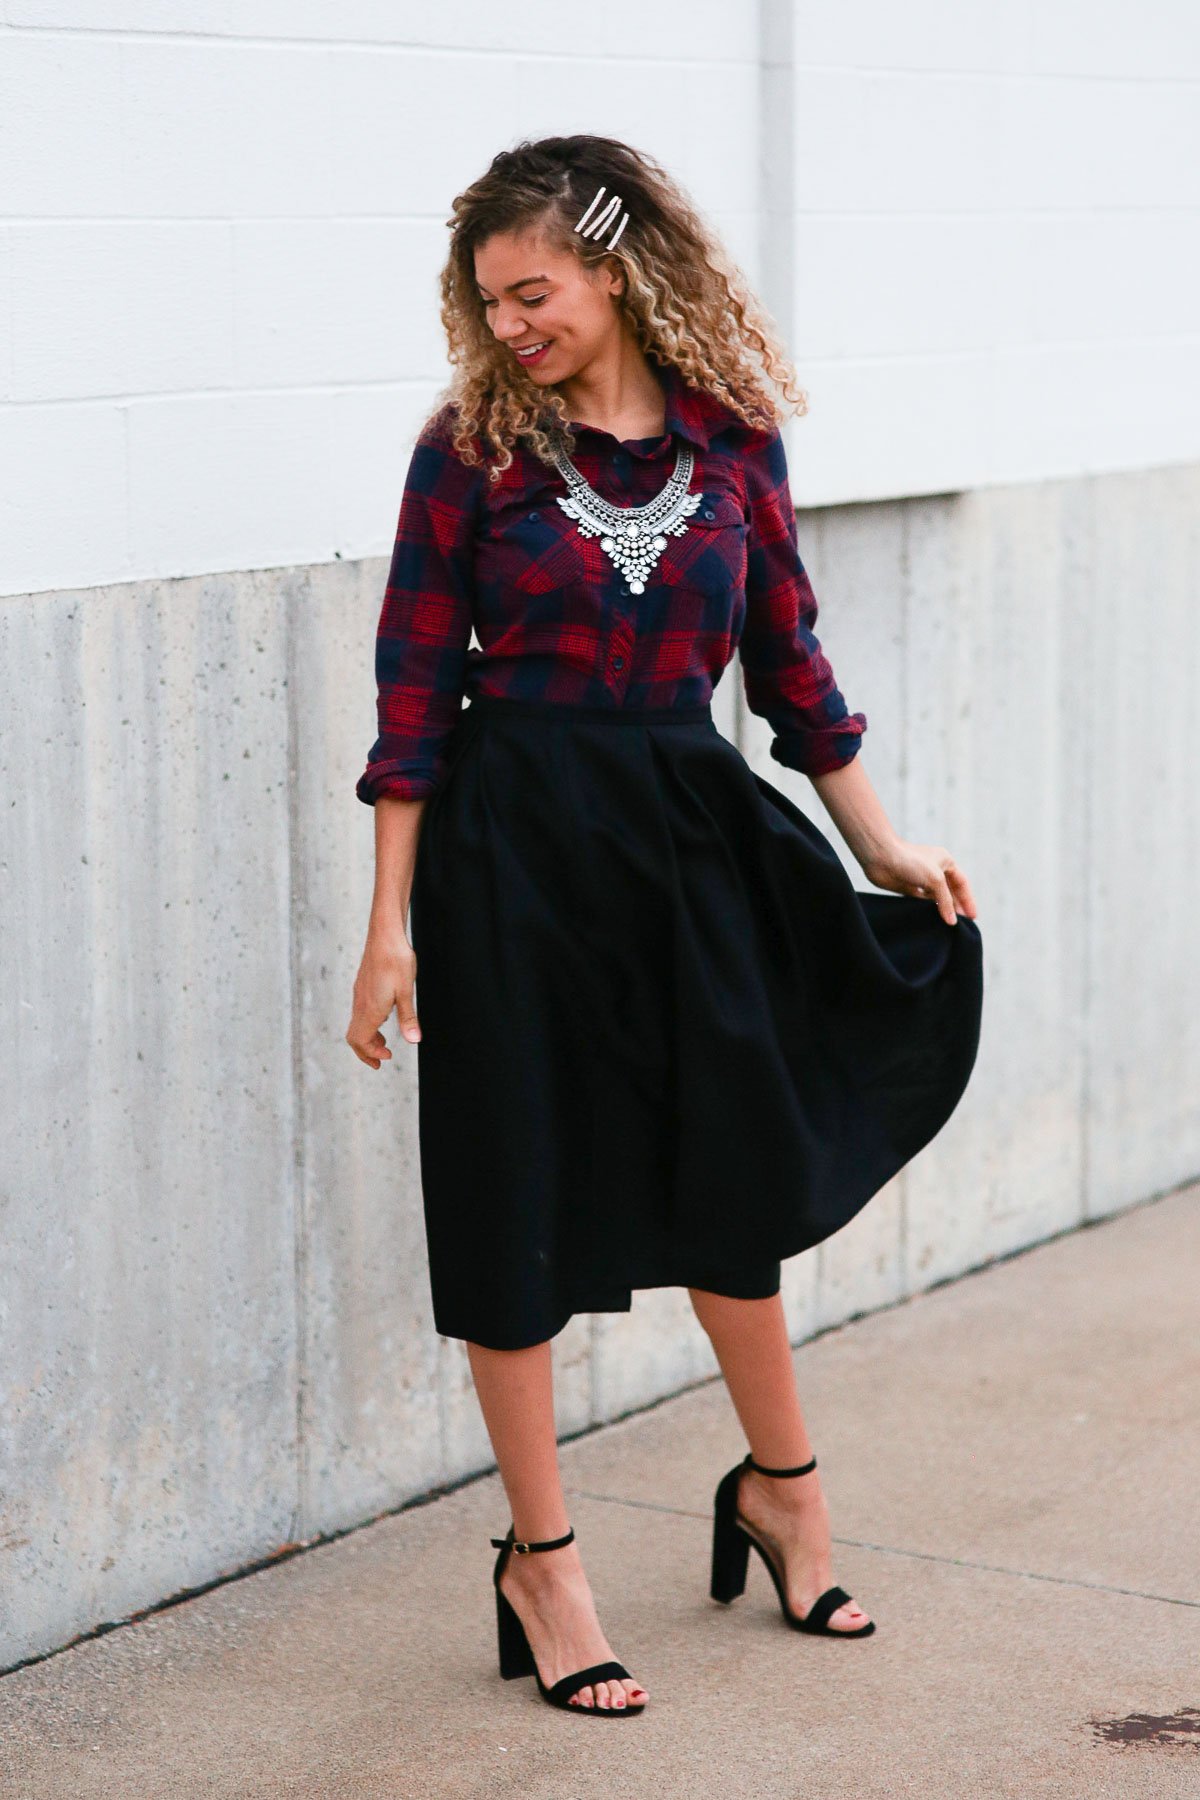 holiday outfits featuring a high waist skirt, plaid shirt, and faux fur